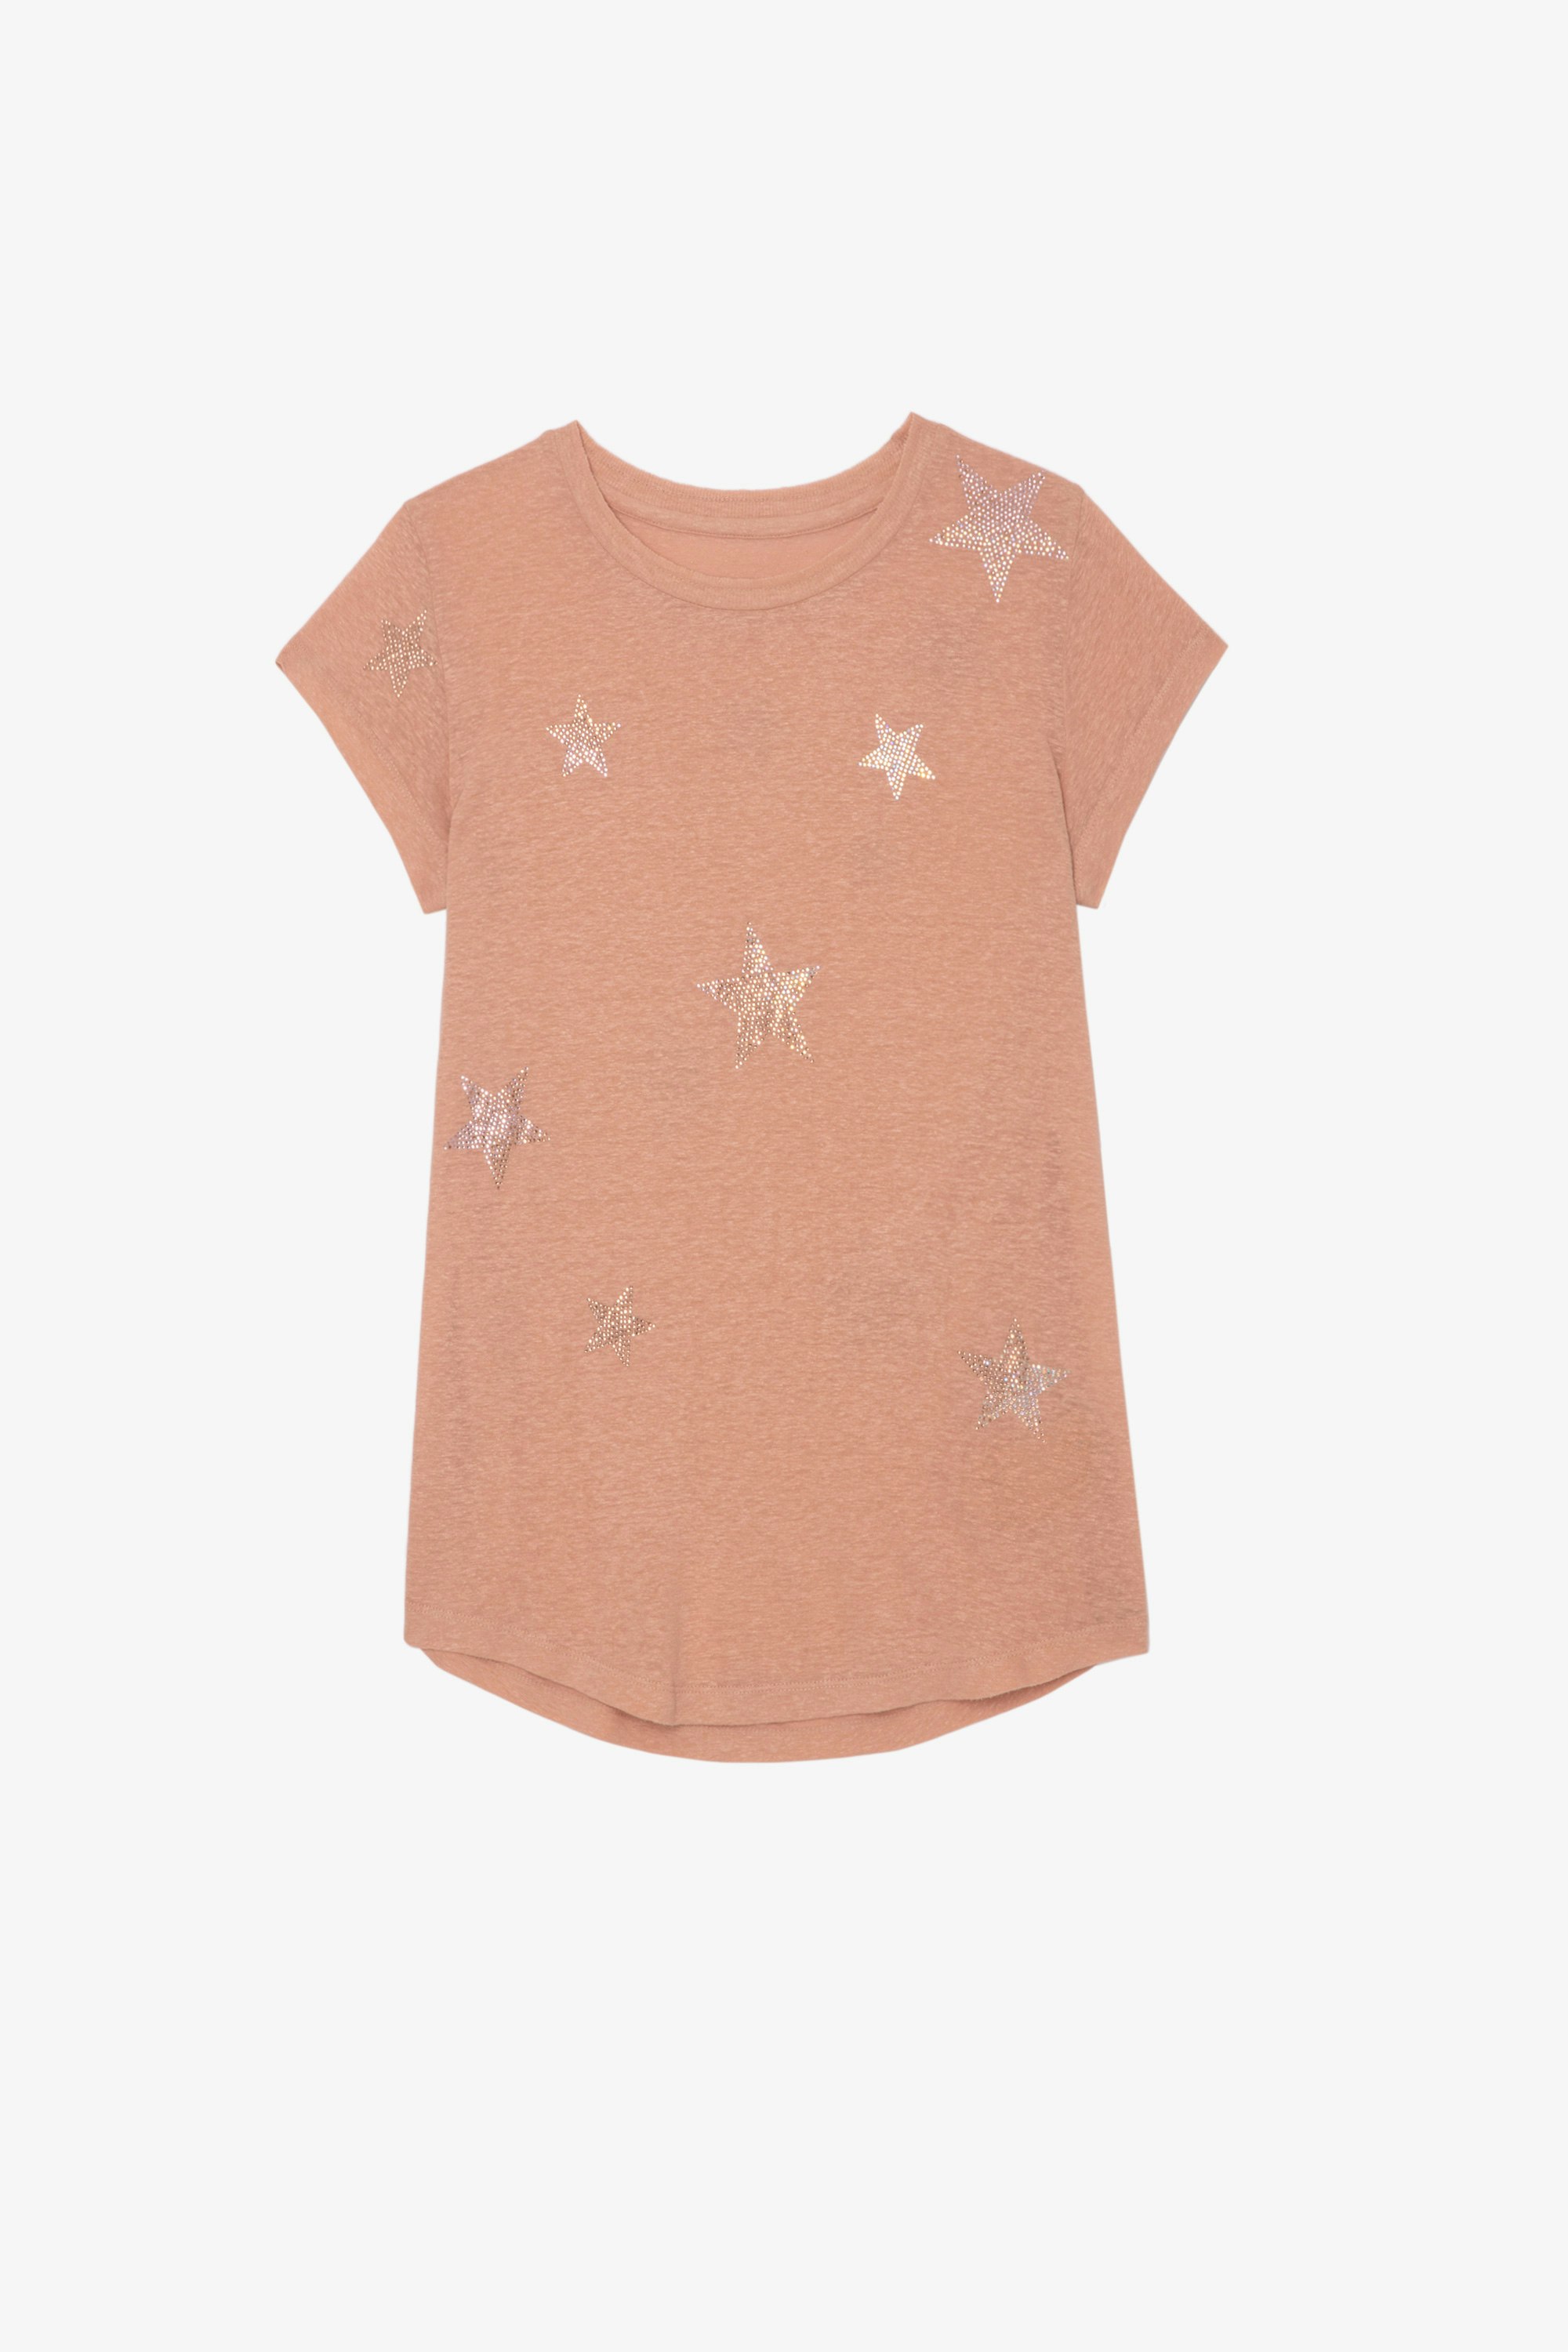 Skinny Stars Strass T-shirt Women’s pink cotton T-shirt with short sleeves and ZV wings motif on the back